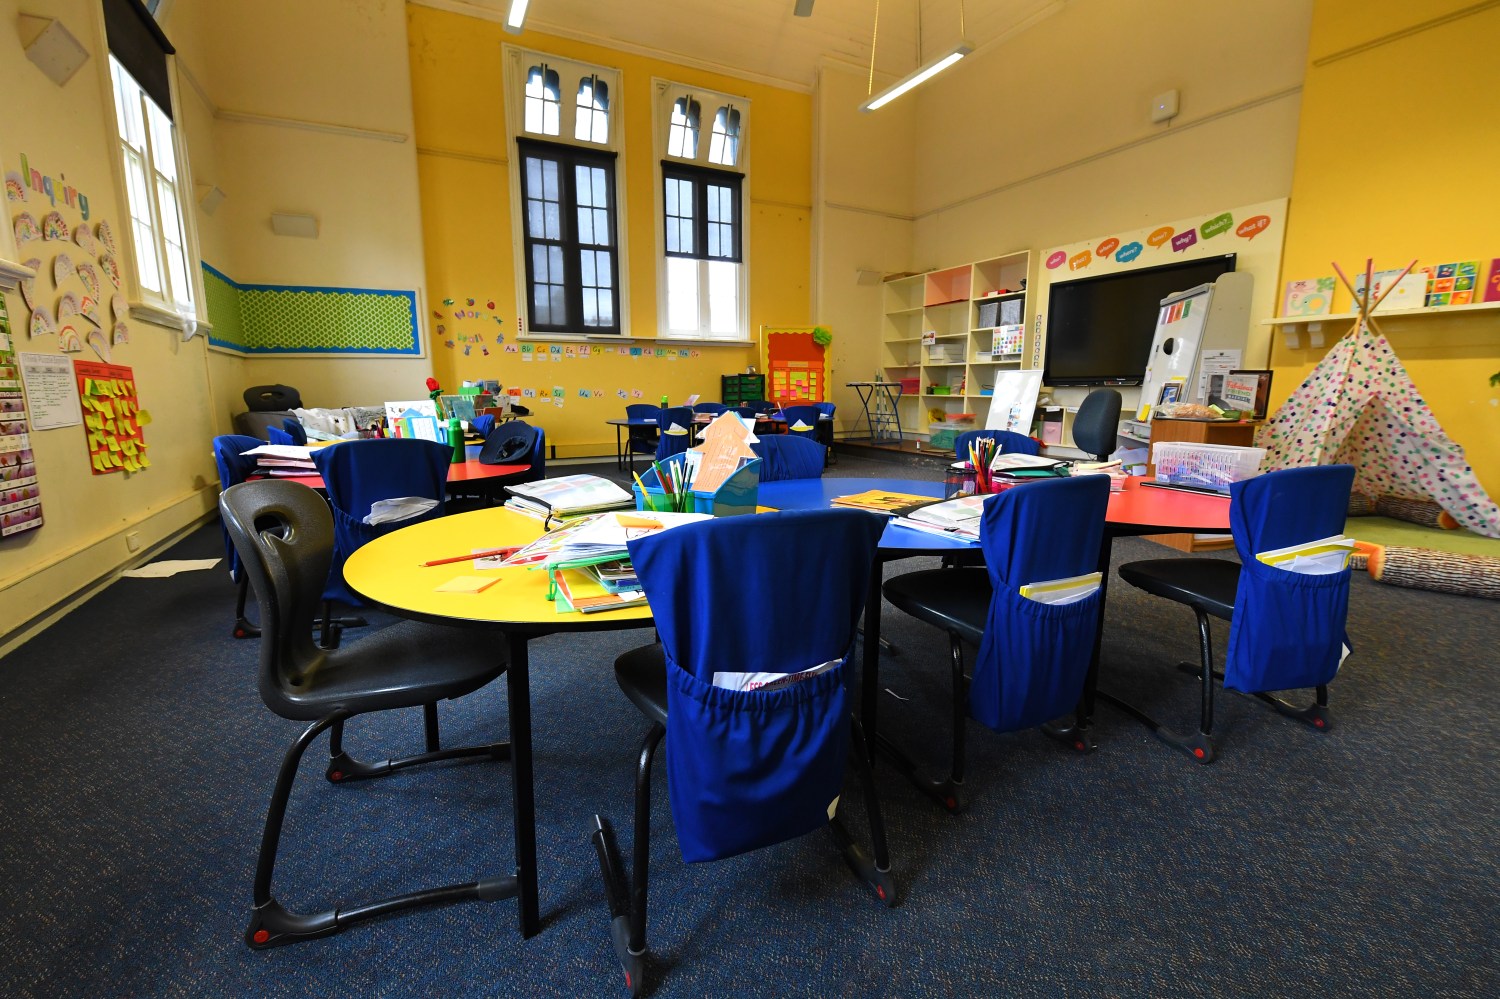 General view of a class room at a Primary School in Melbourne's inner north, Monday, March 23, 2020. Victorian Premier Daniel Andrews has brought forward school holidays as a measure to slow the rapid spreading Covid-19 virus throughout the state. (AAP Image/James Ross) NO ARCHIVINGNo Use Australia. No Use New Zealand.